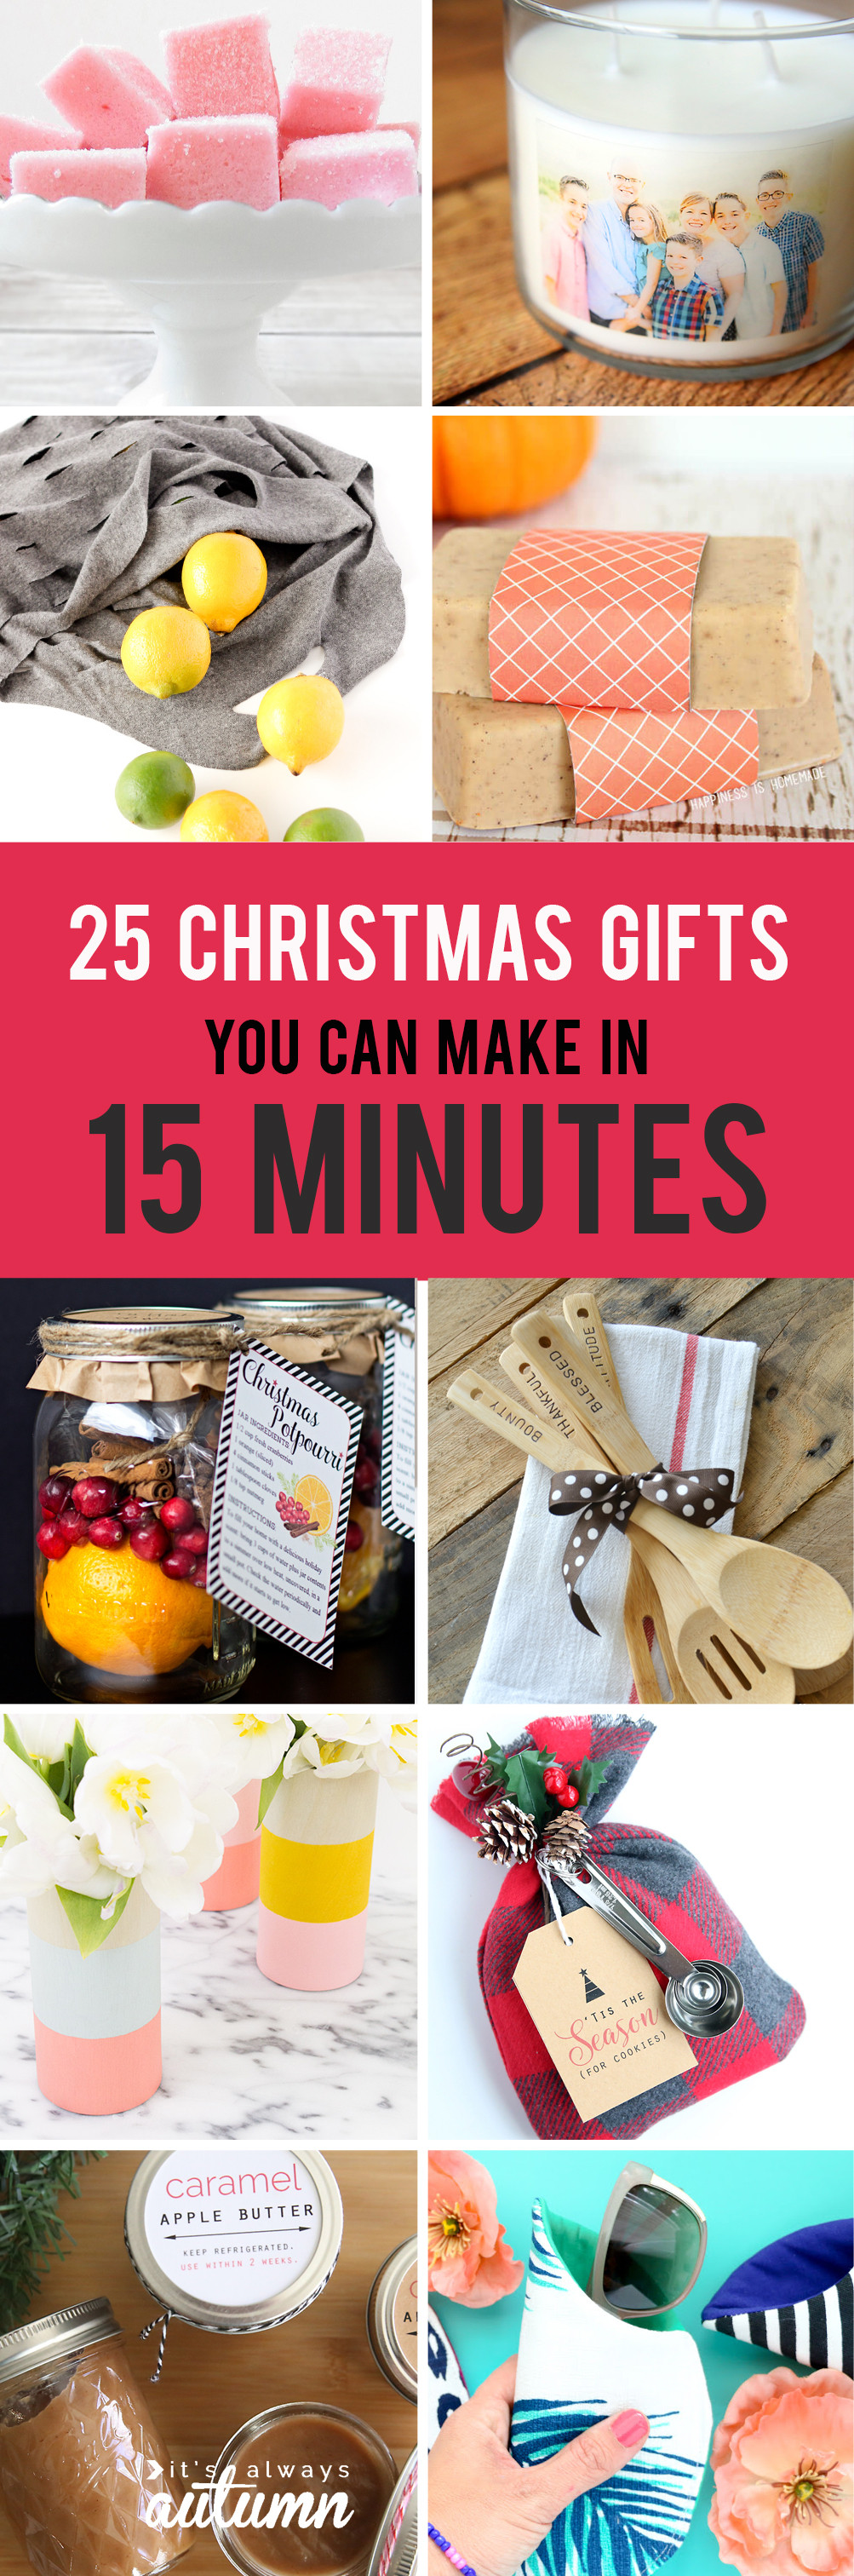 DIY Holiday Gifts
 25 easy homemade Christmas ts you can make in 15